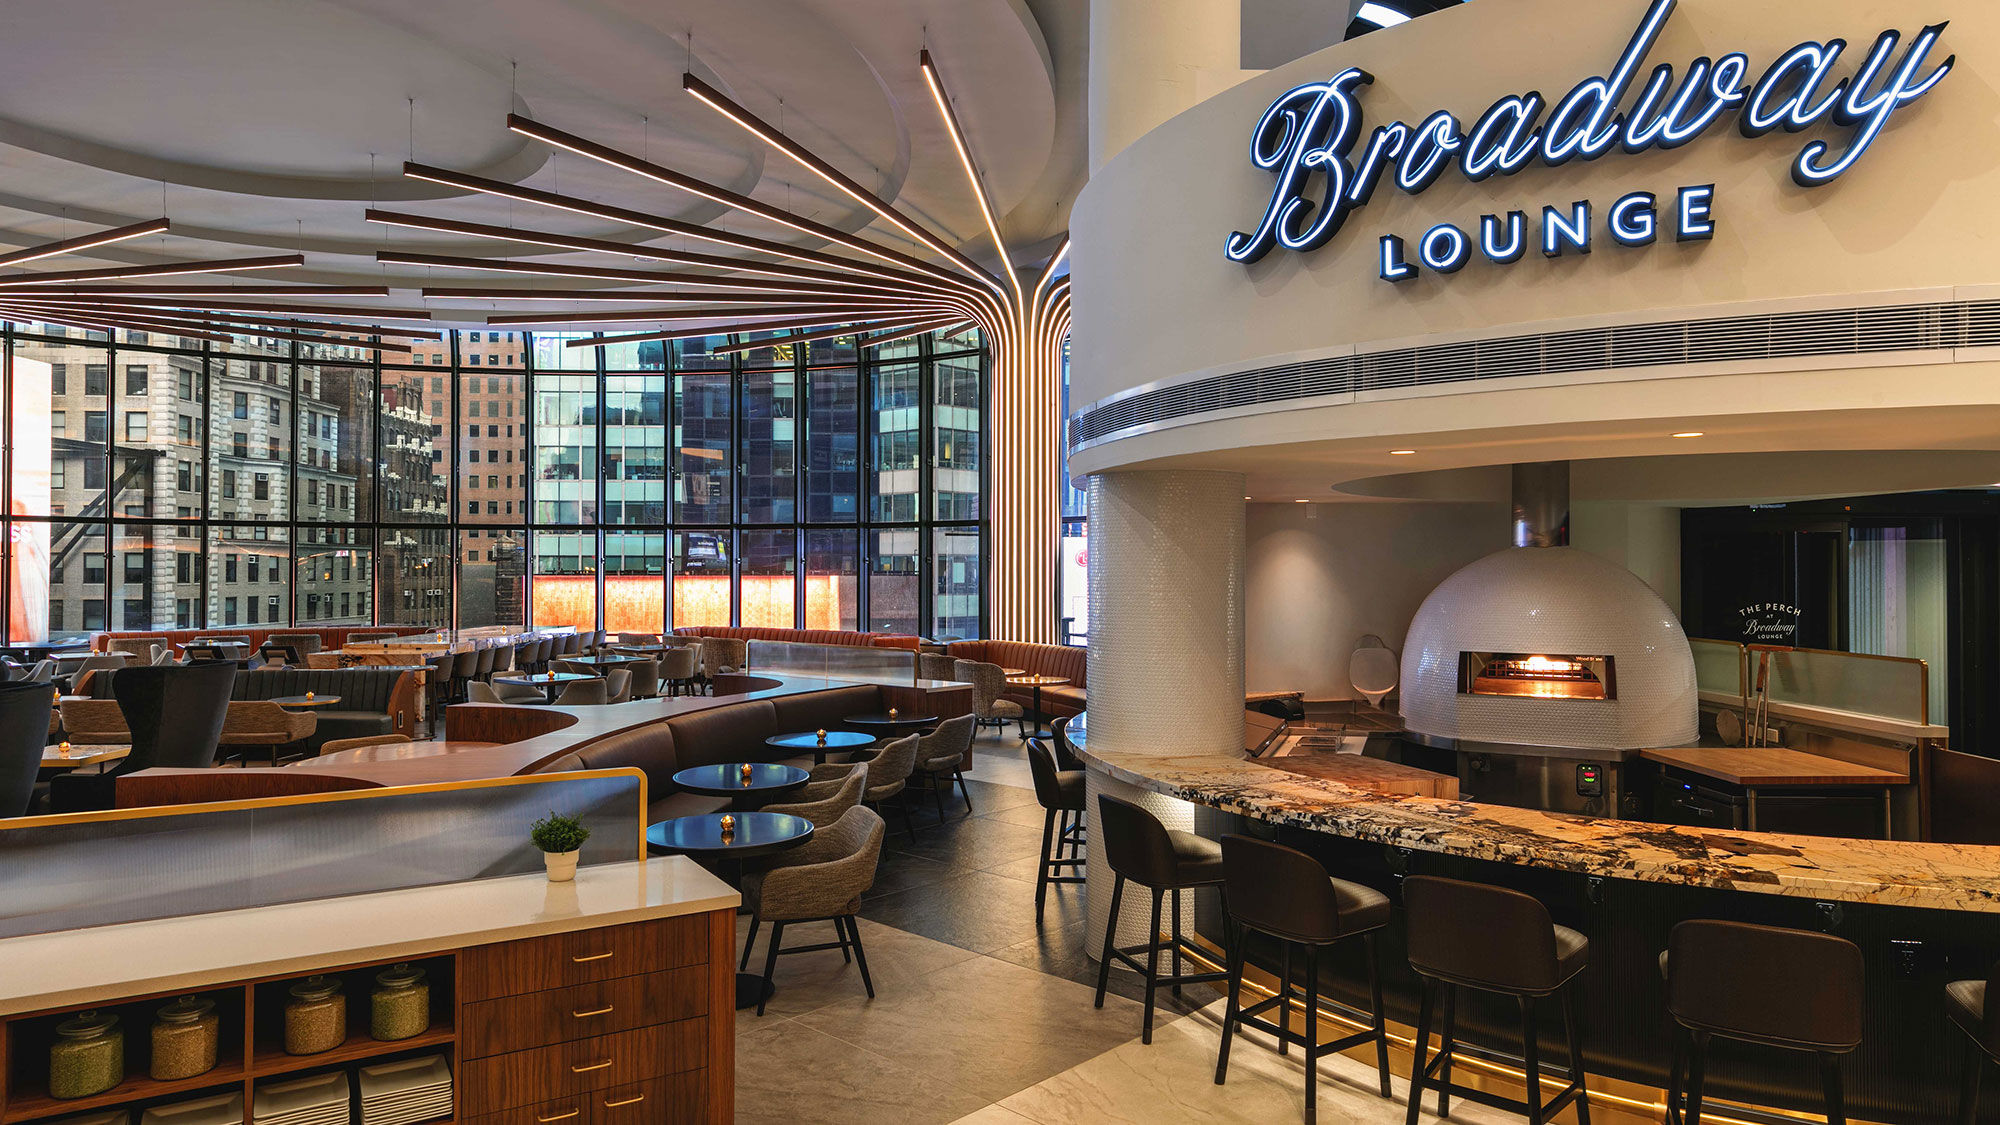 The new Broadway Lounge restaurant at the New York Marriott Marquis.